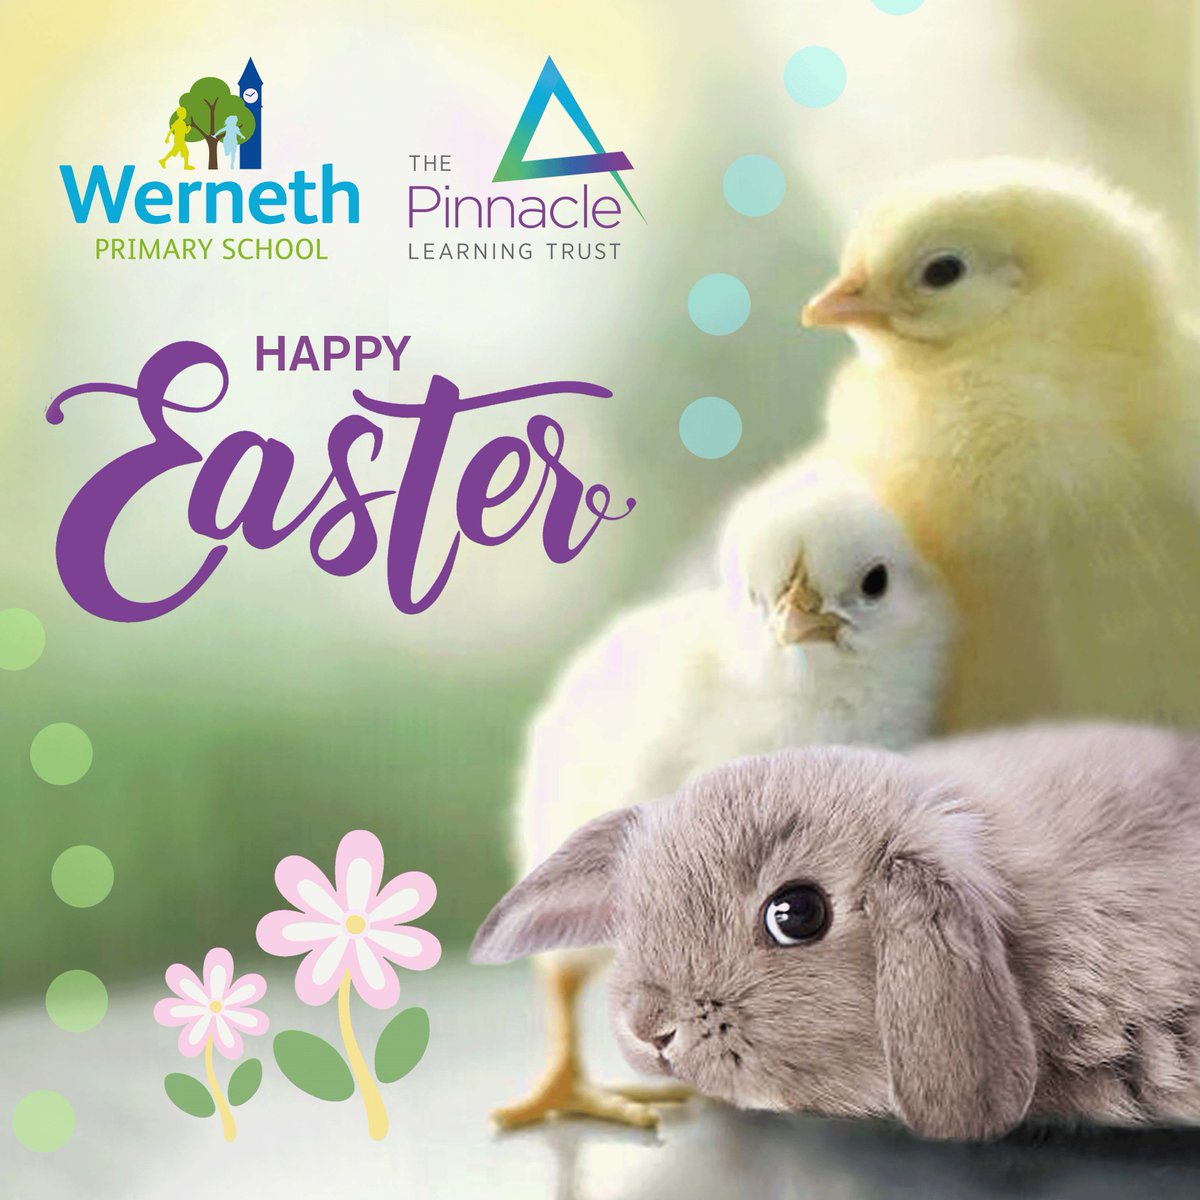 Happy Easter from everyone at Werneth Primary School!